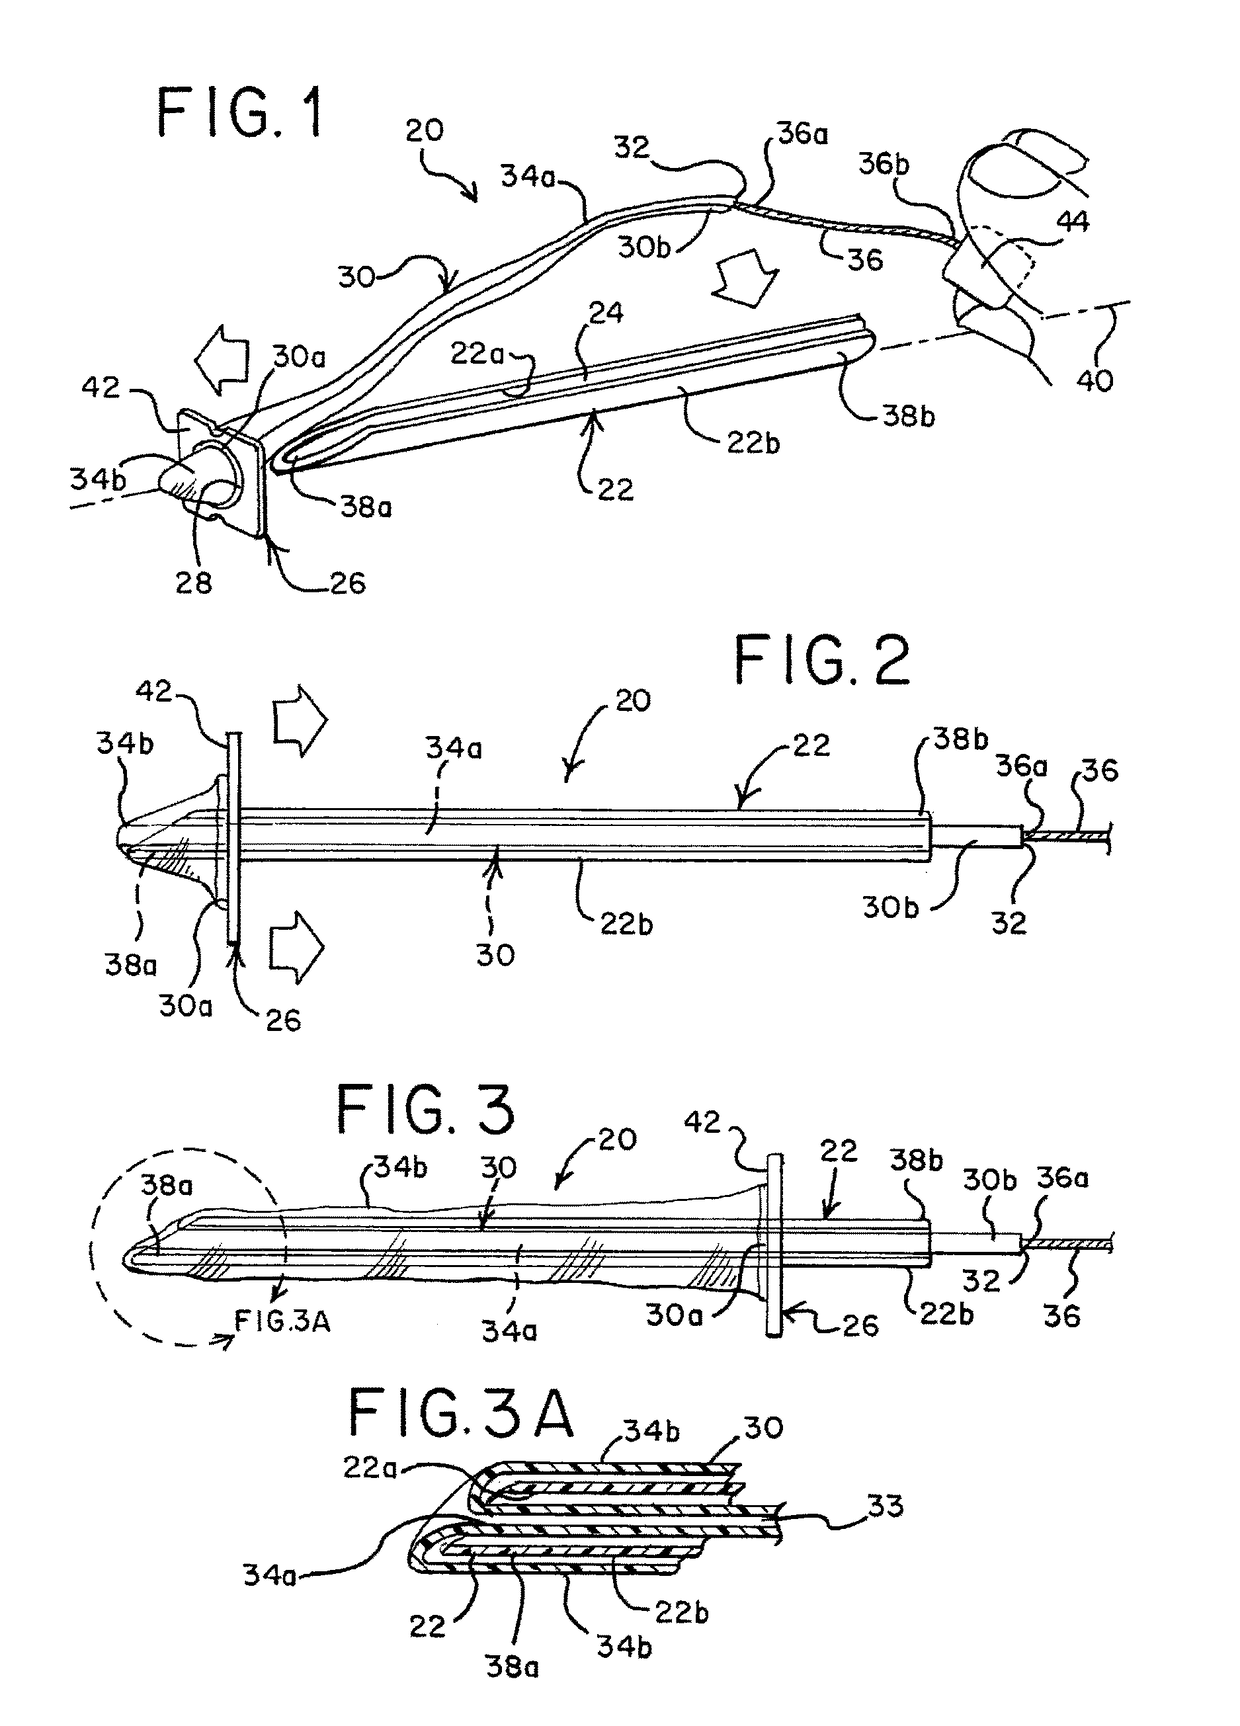 Intermittent catheter assembly and kit